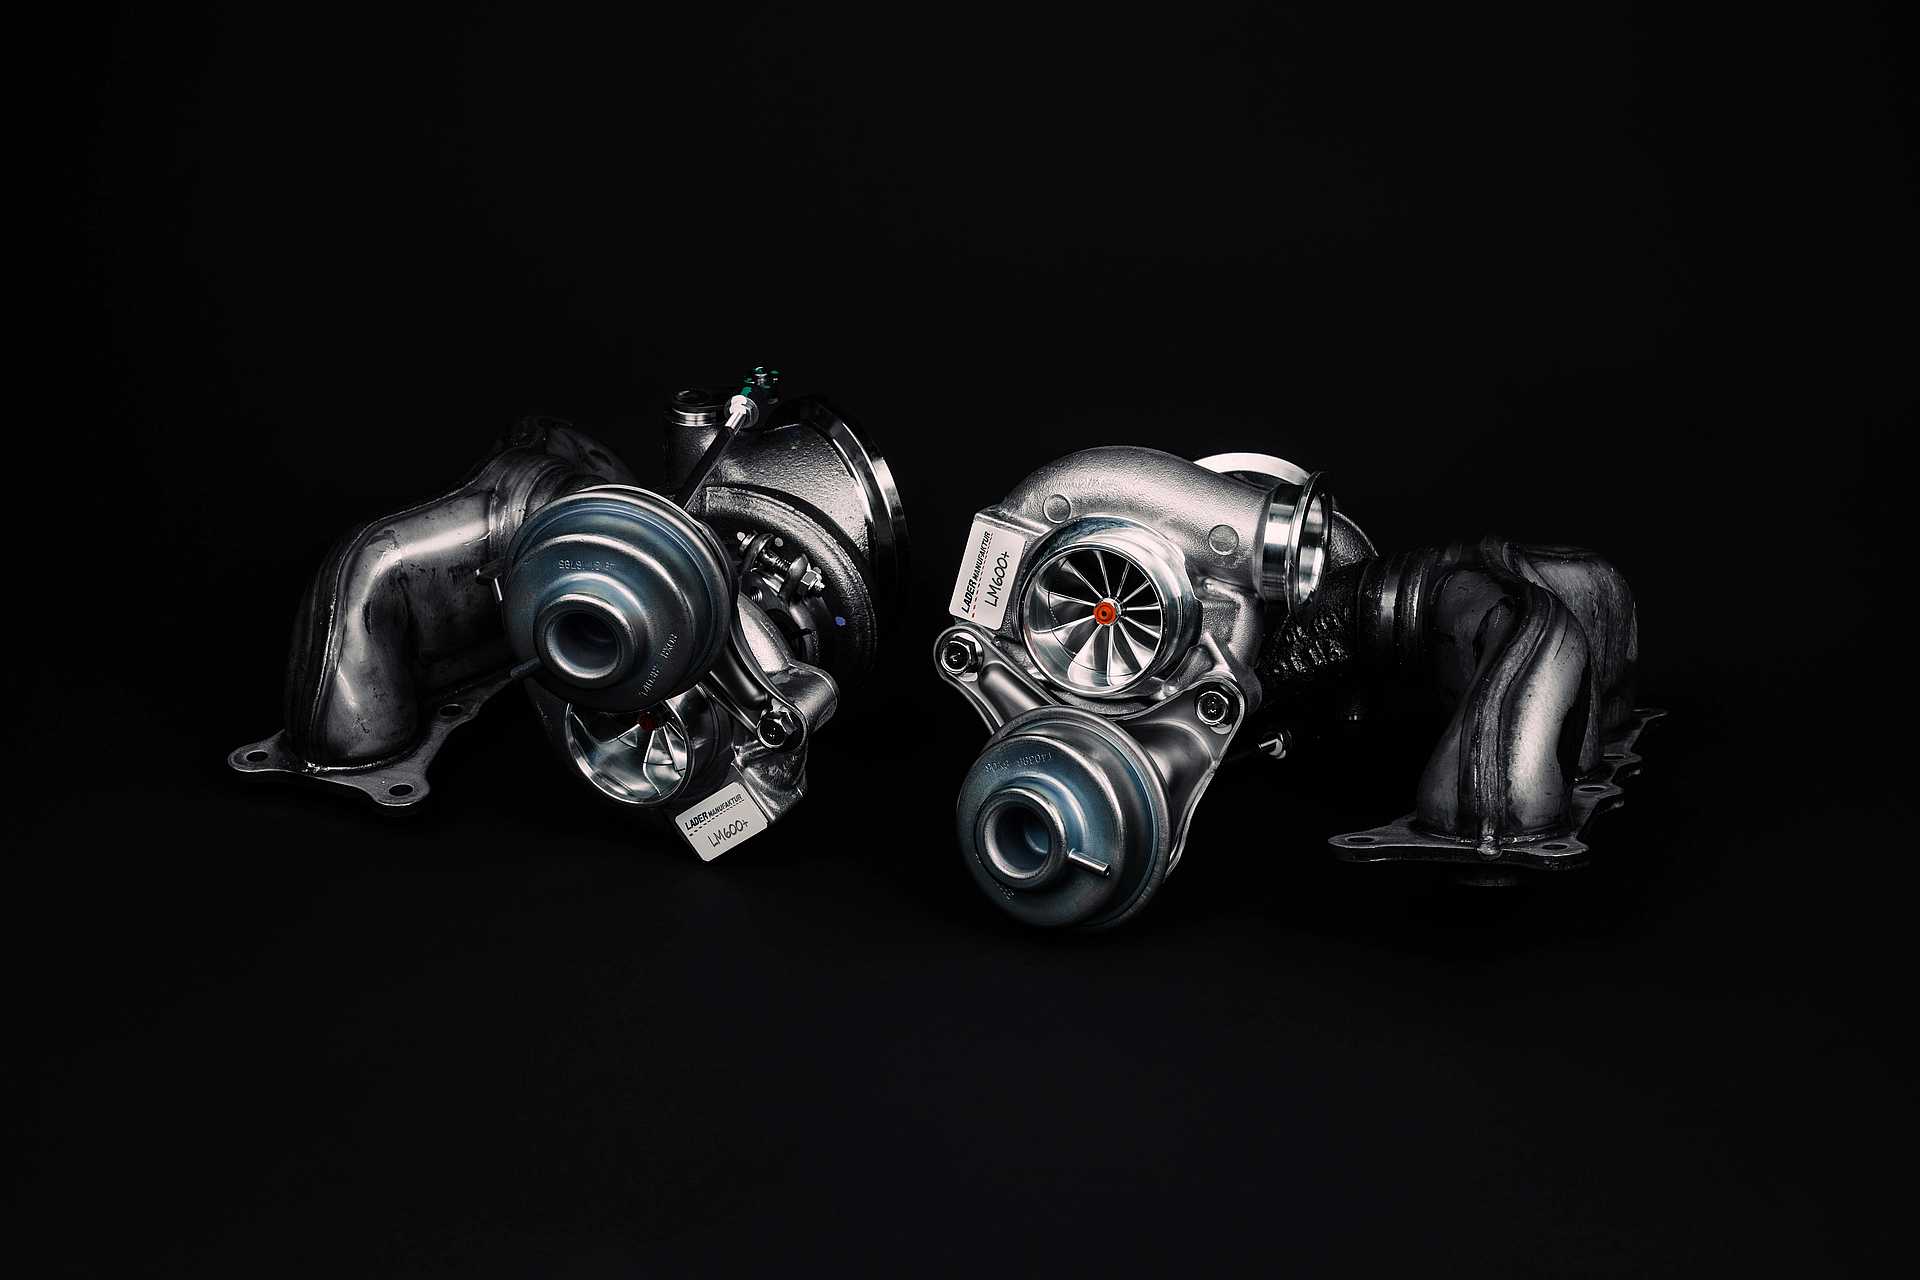 LM600+ upgrade Turbocharger suitable for BMW N54B30 x35i/x40i